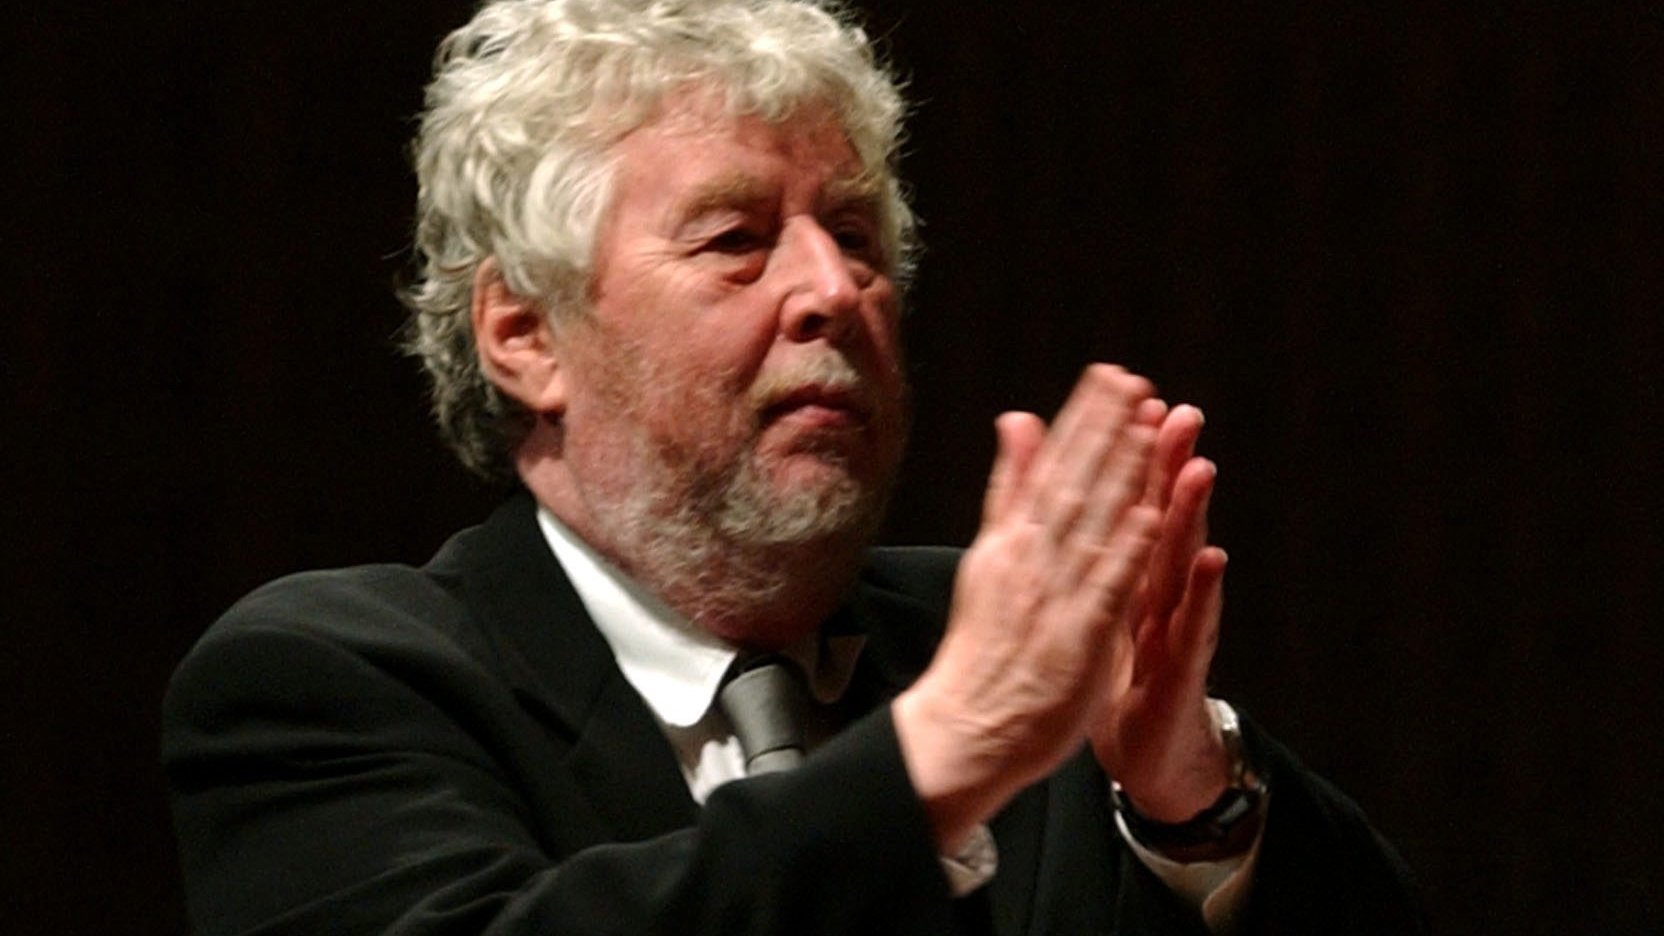 epa000276797 Composer Harrison Birtwistle, from Britain, congratulates Conductor Boulez from France and the Lucerne Festival Academy Orchestra, on Thursday, 16 September 2004, at the Lucerne Festival in the KKL Culture and Congress Centre in Lucerne.  EPA/SIGI TISCHLER